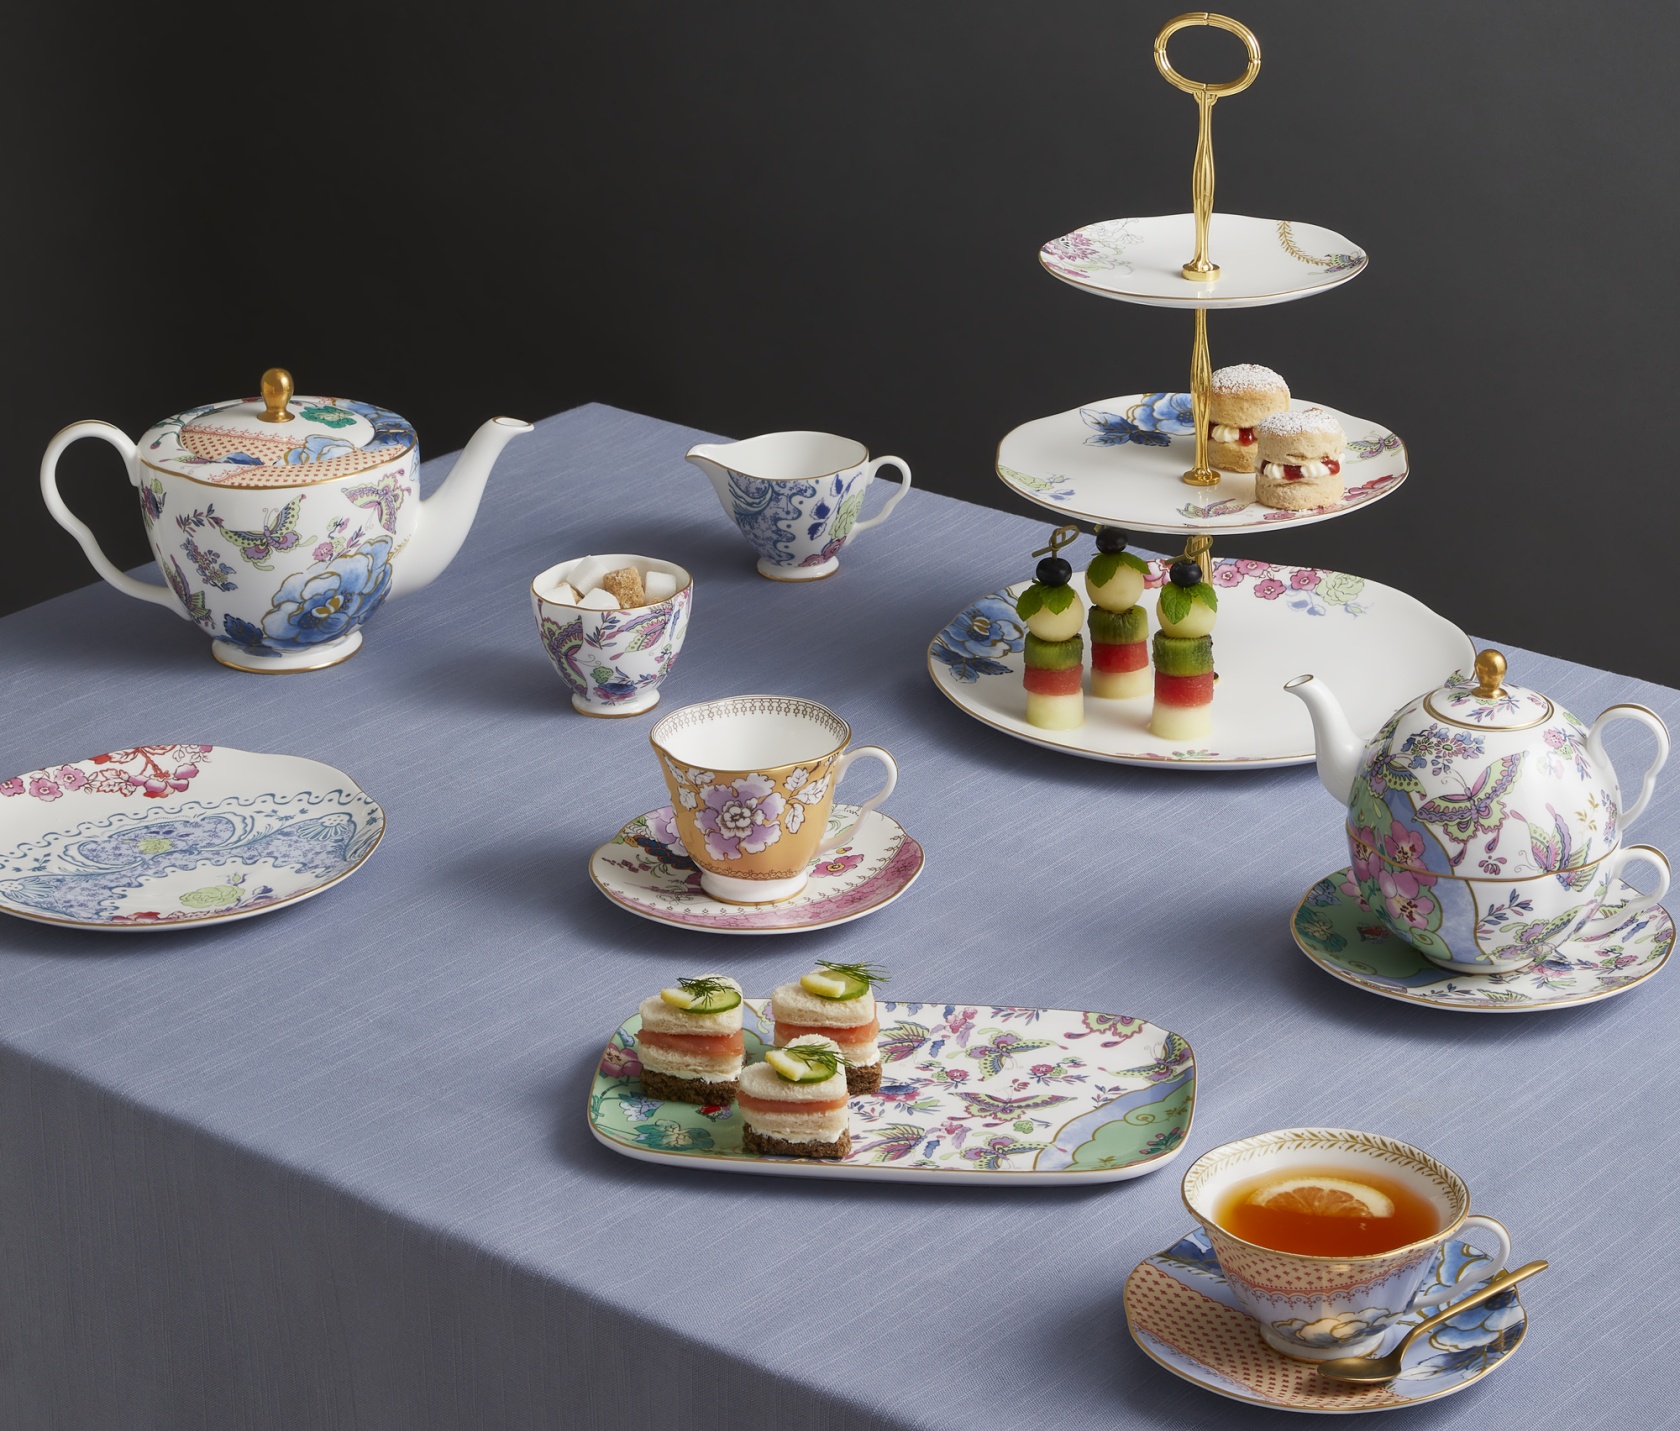 Wedgwood’s Butterfly Bloom Collection